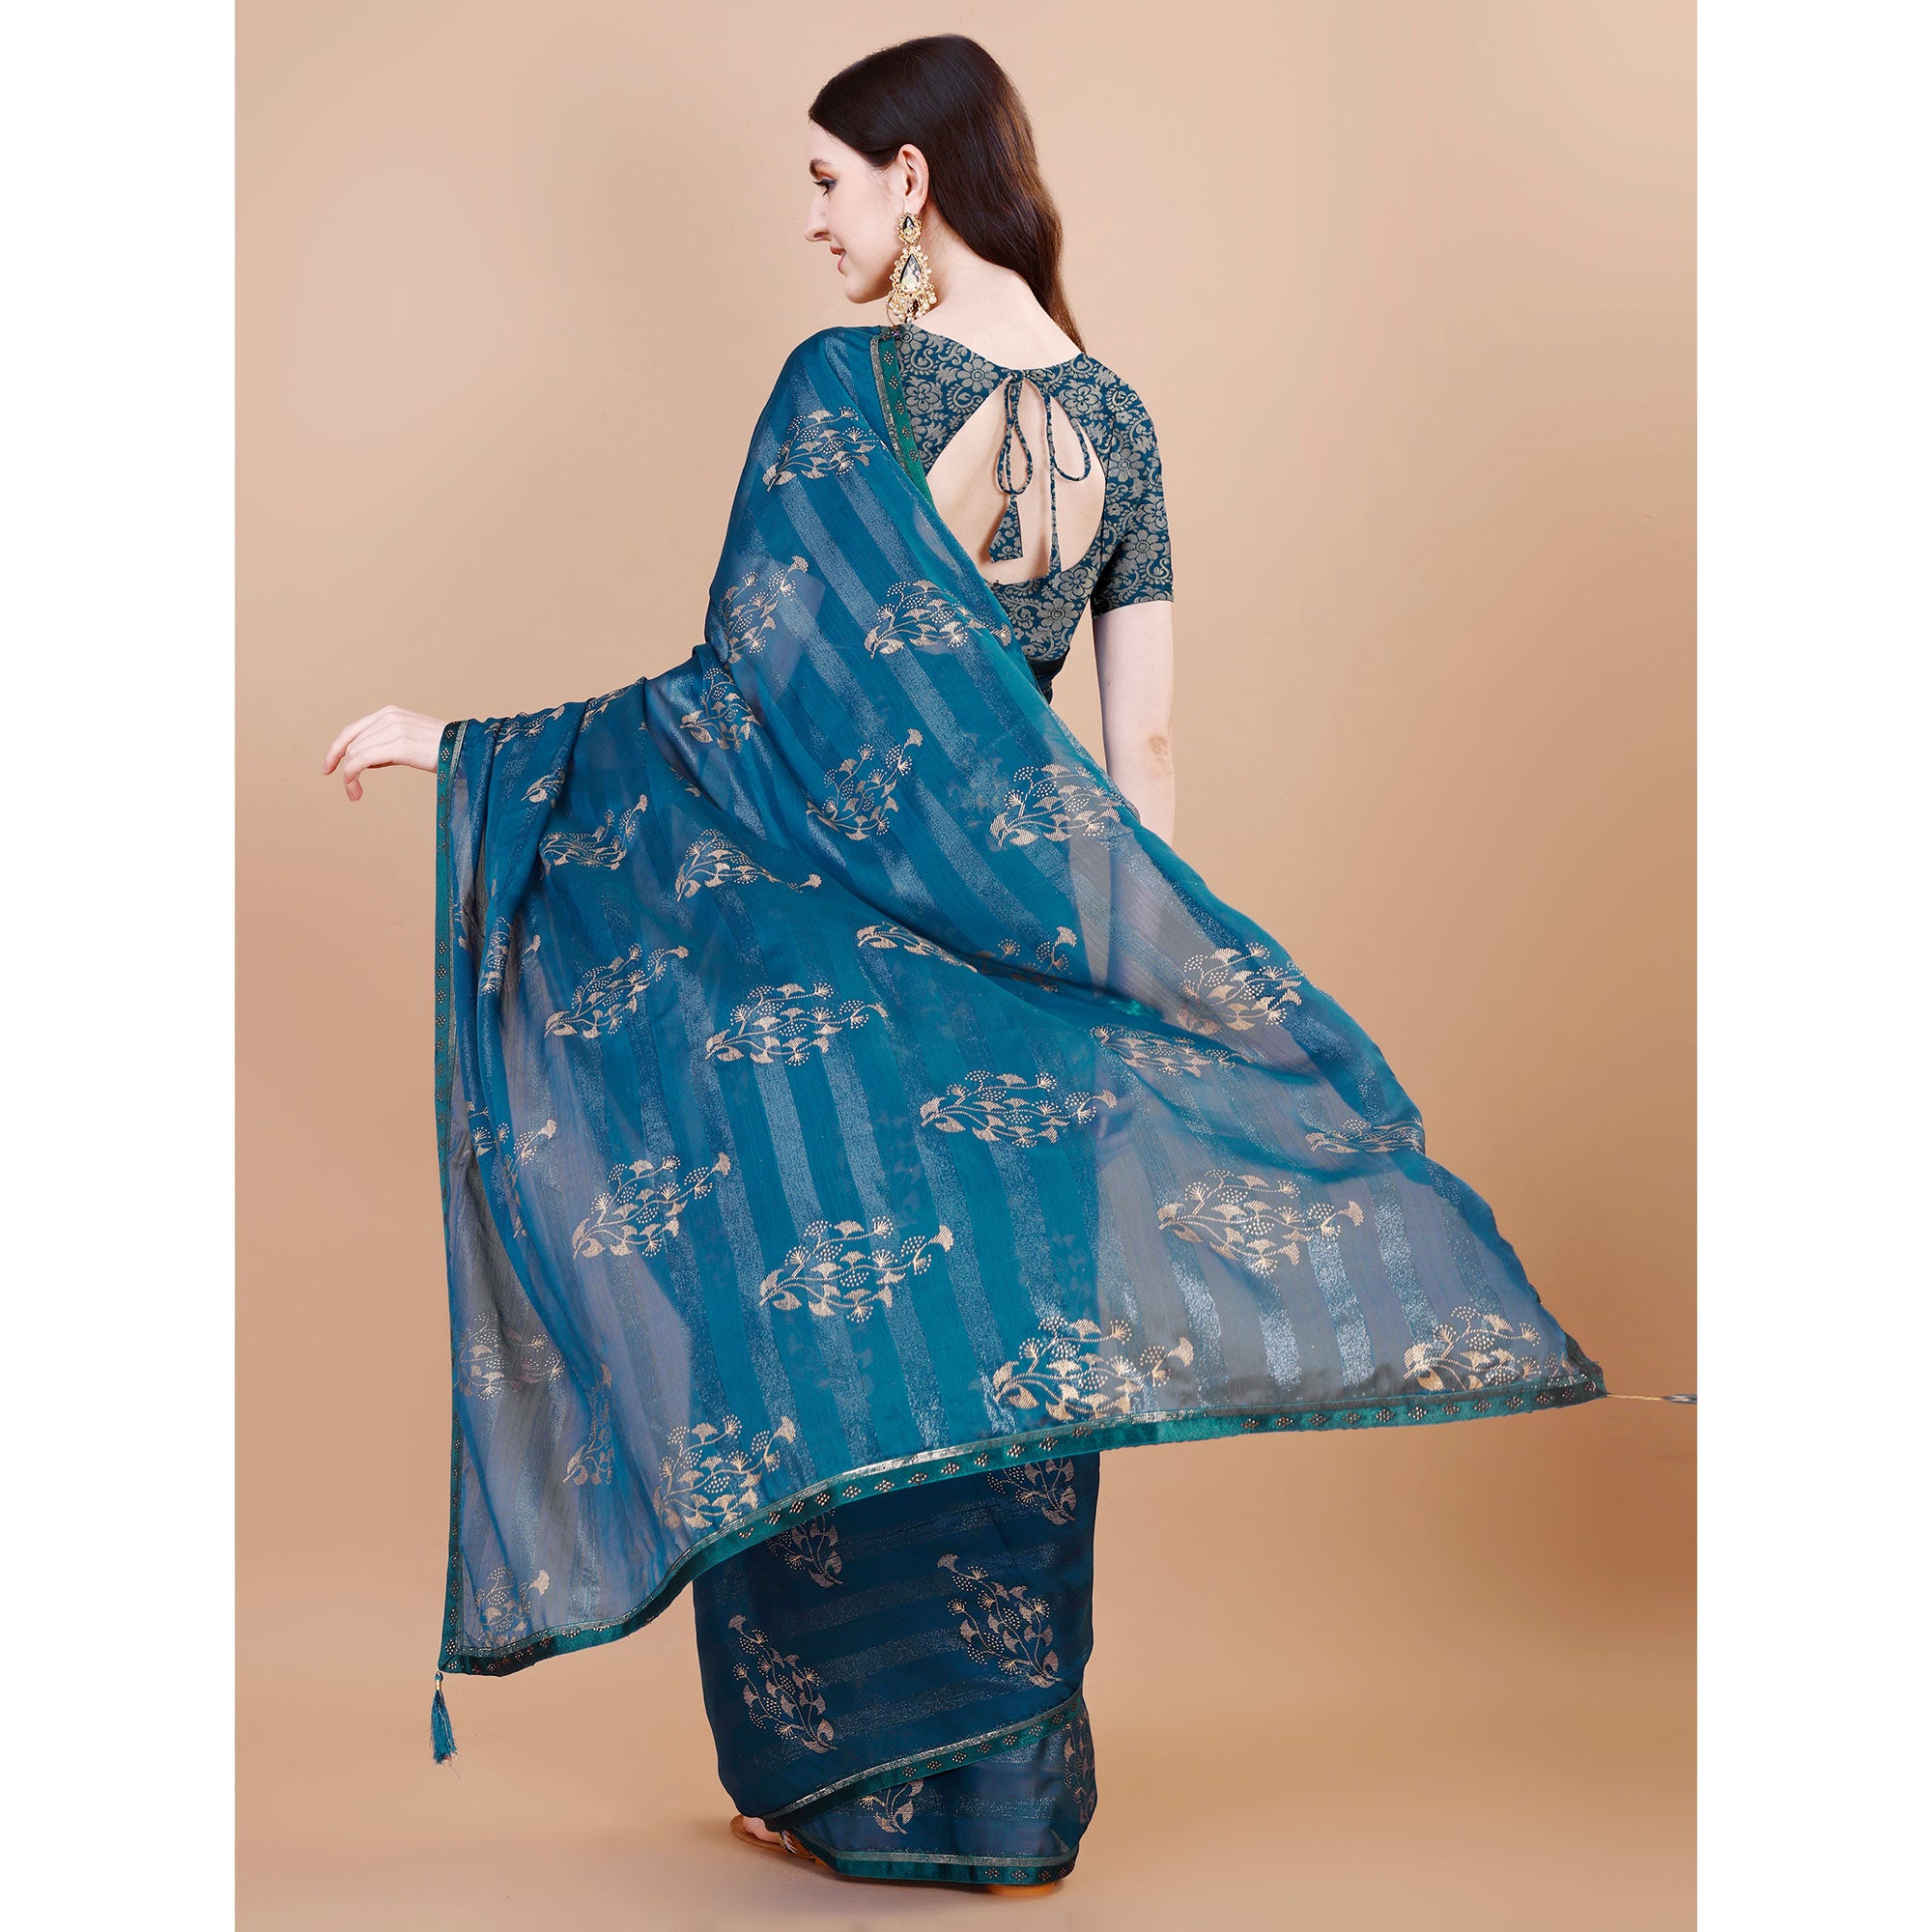 Blue Foil Printed Chiffon Saree With Lace Border